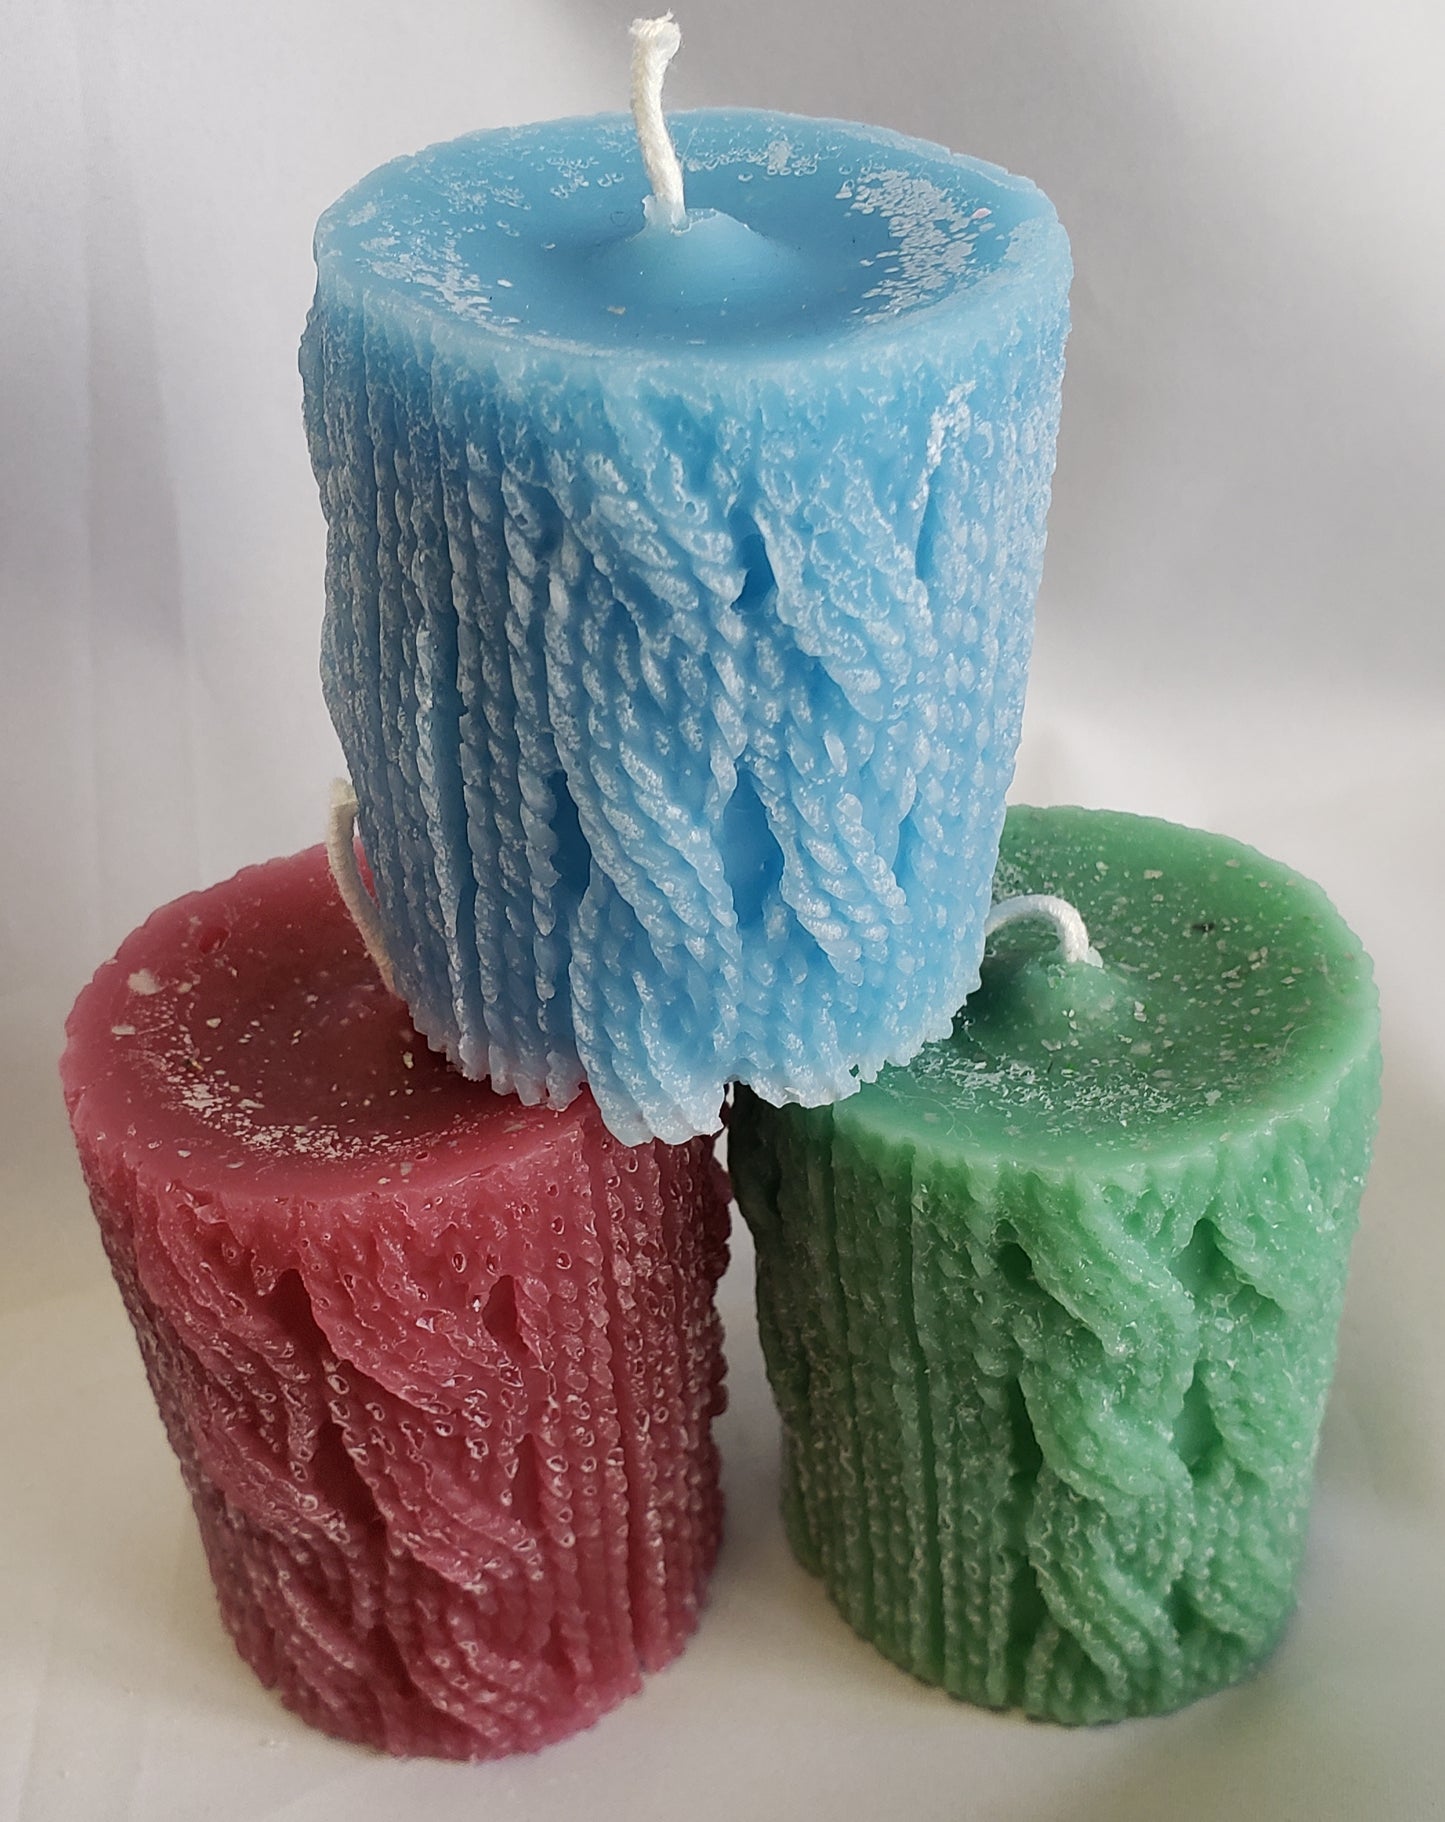 Candles for knitters!